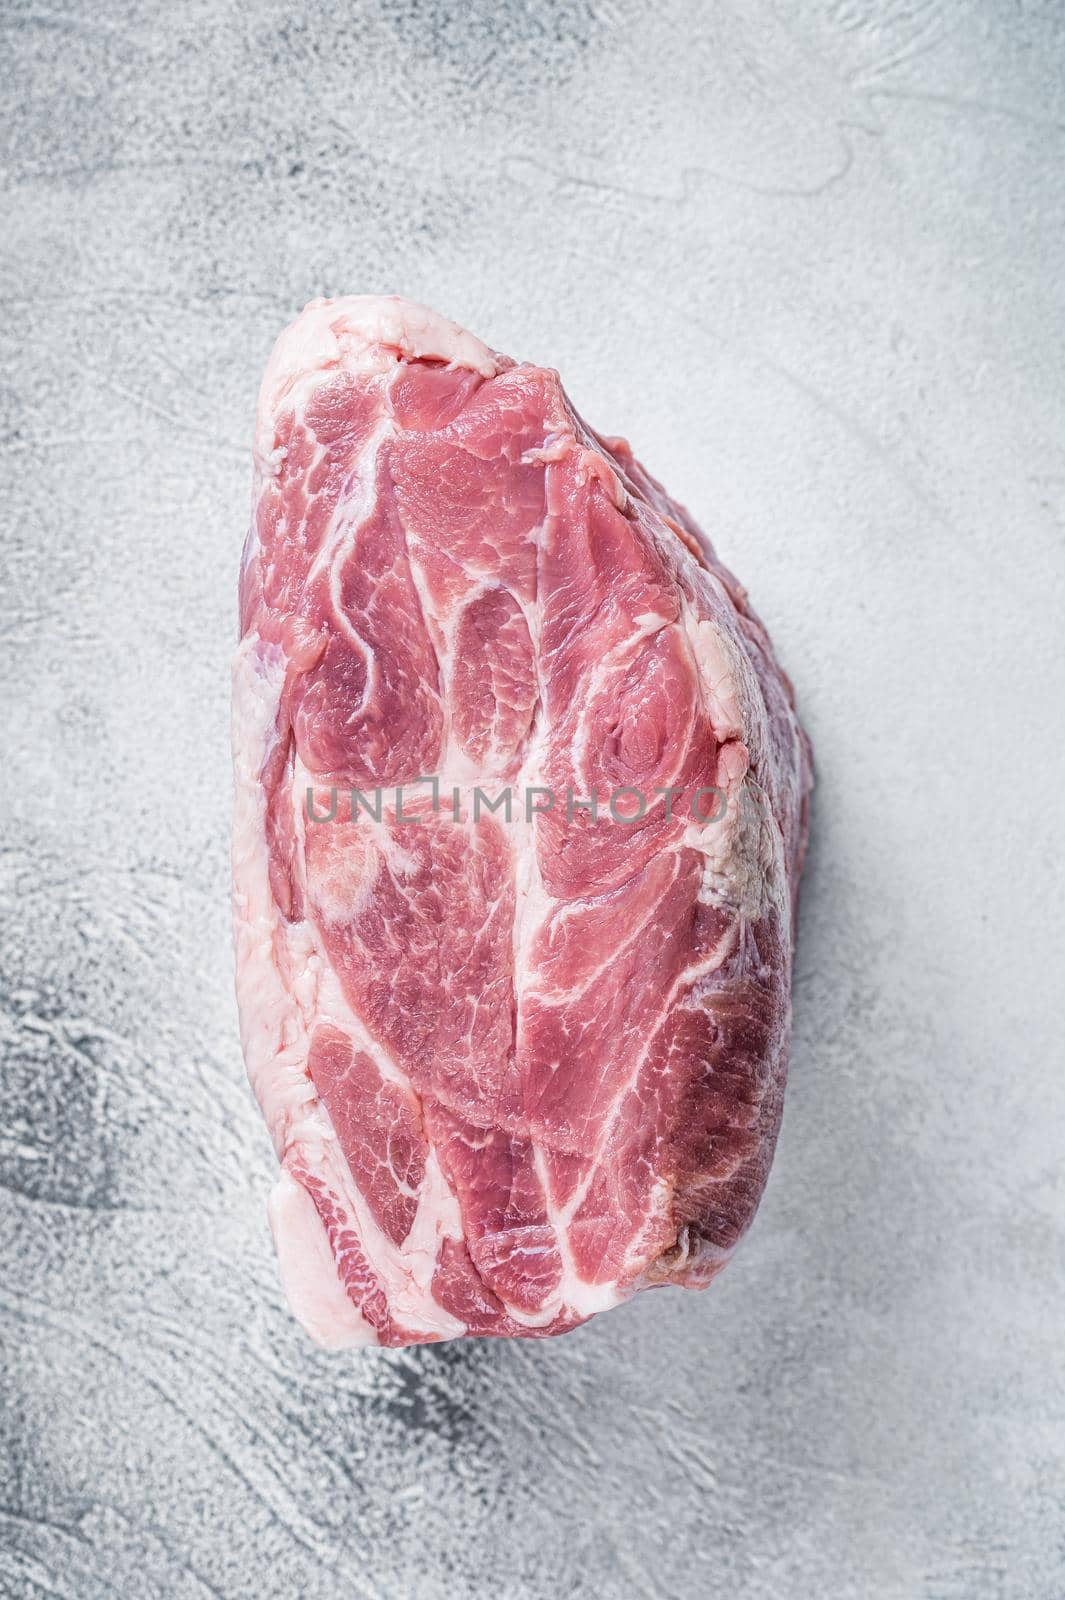 Raw pork neck meat for Chop steak on kichen table. White background. Top view by Composter